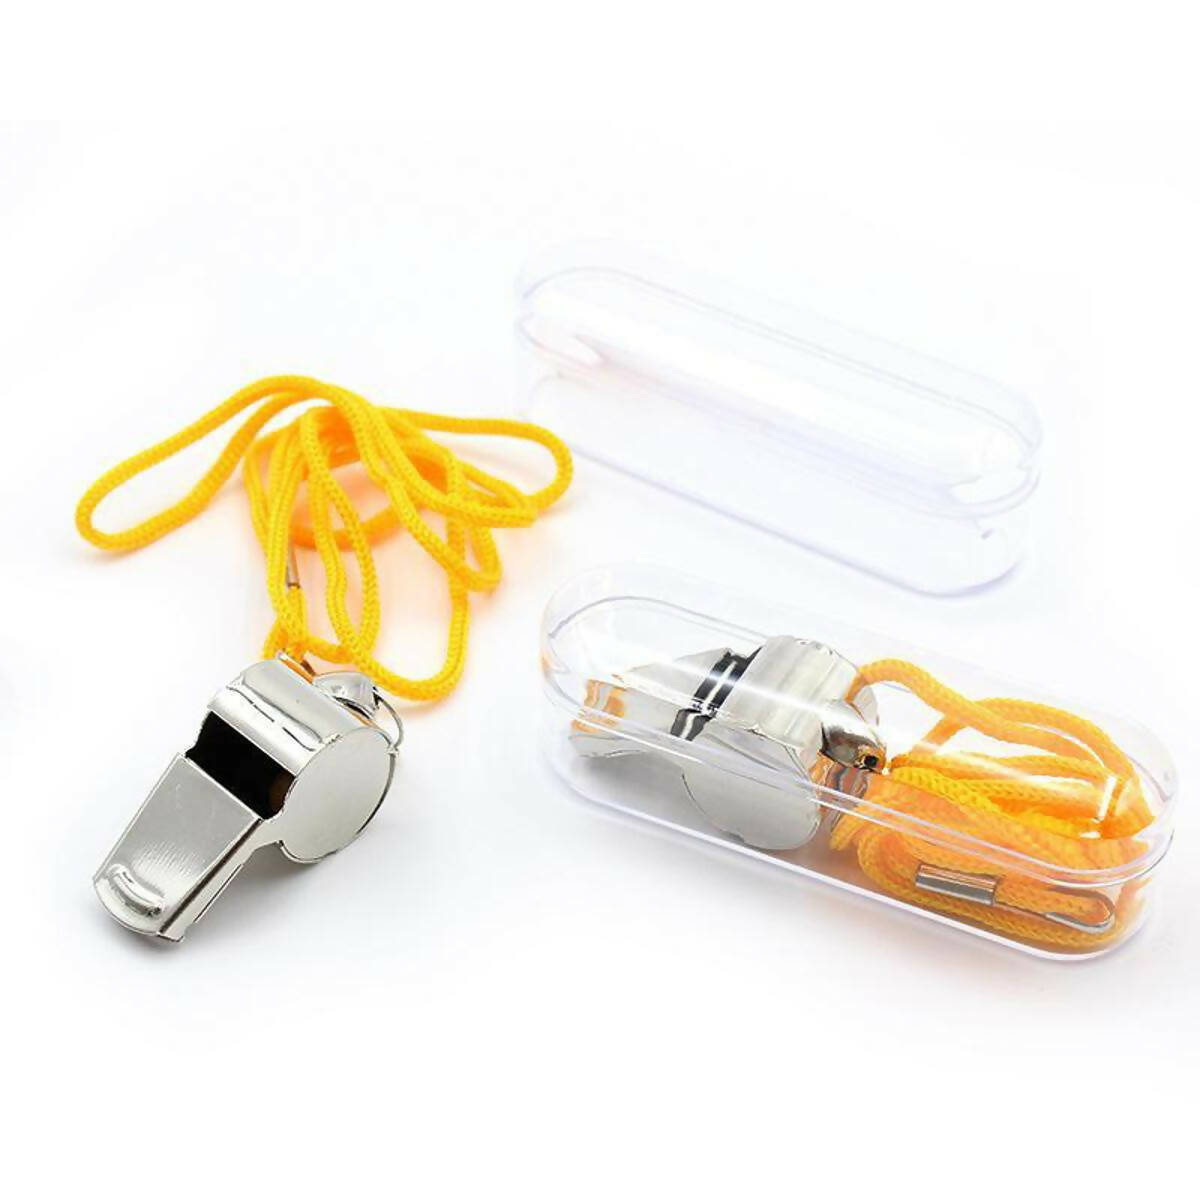 Football Soccer Referee Metal Whistle With Lanyard Silver Pea-Less